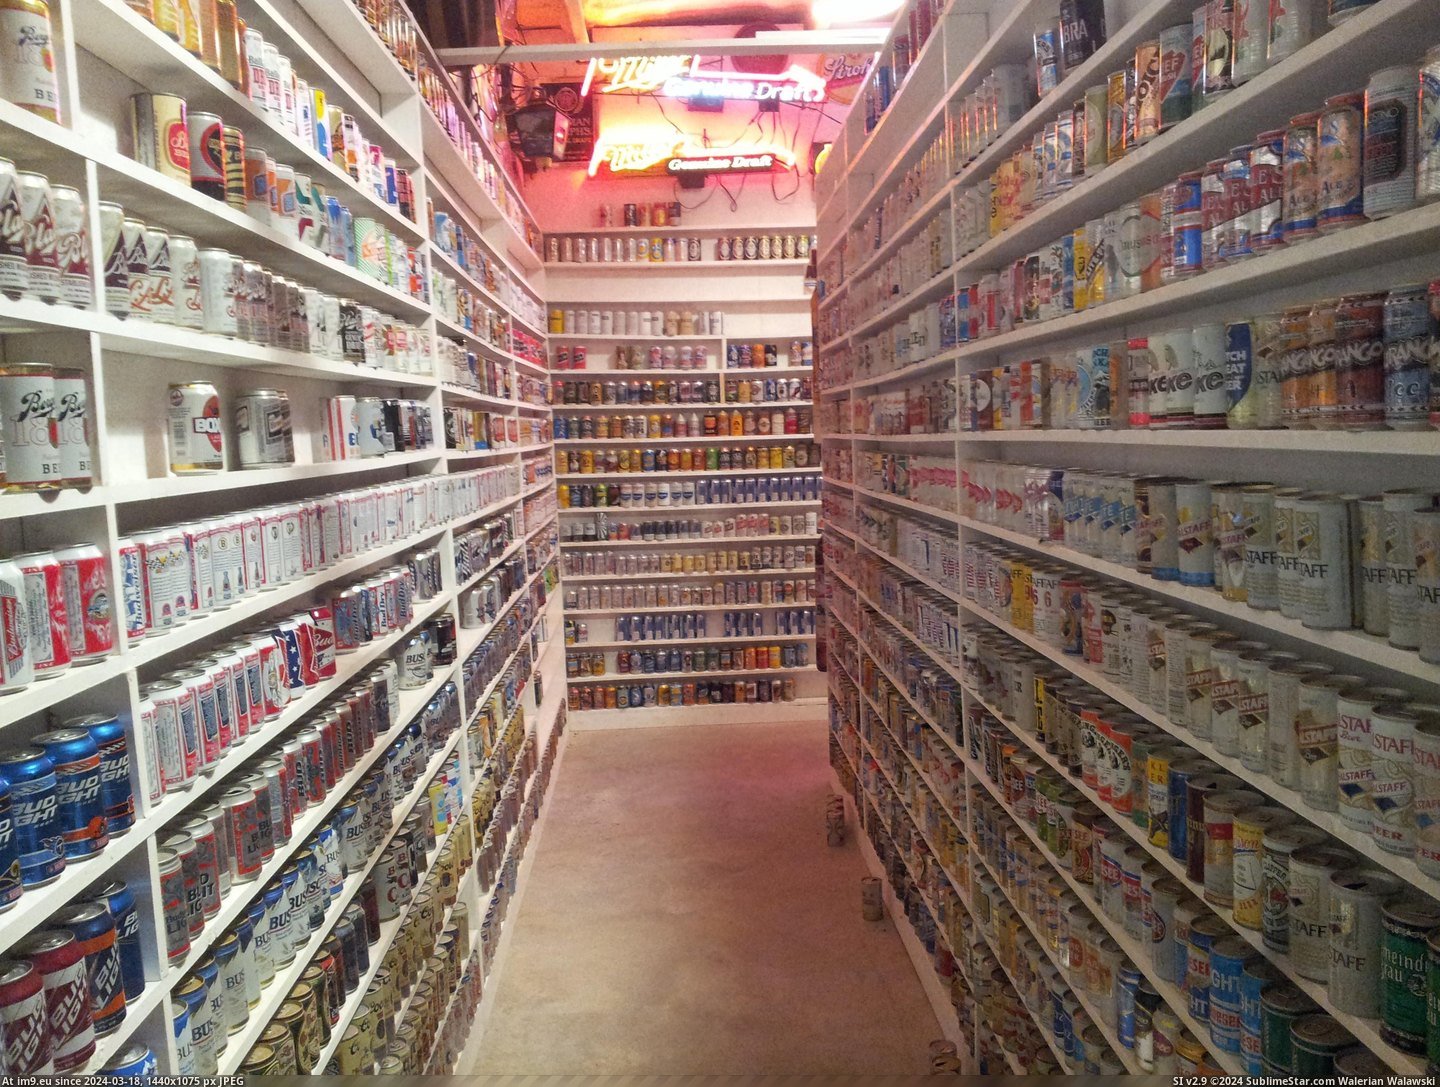 #Collection #For #Years #Grandpa #Cans #Collecting #Share #Thought #Beer [Pics] My grandpa has been collecting beer cans for over thirty years, so I thought I would go ahead and share his collection wi Pic. (Bild von album My r/PICS favs))